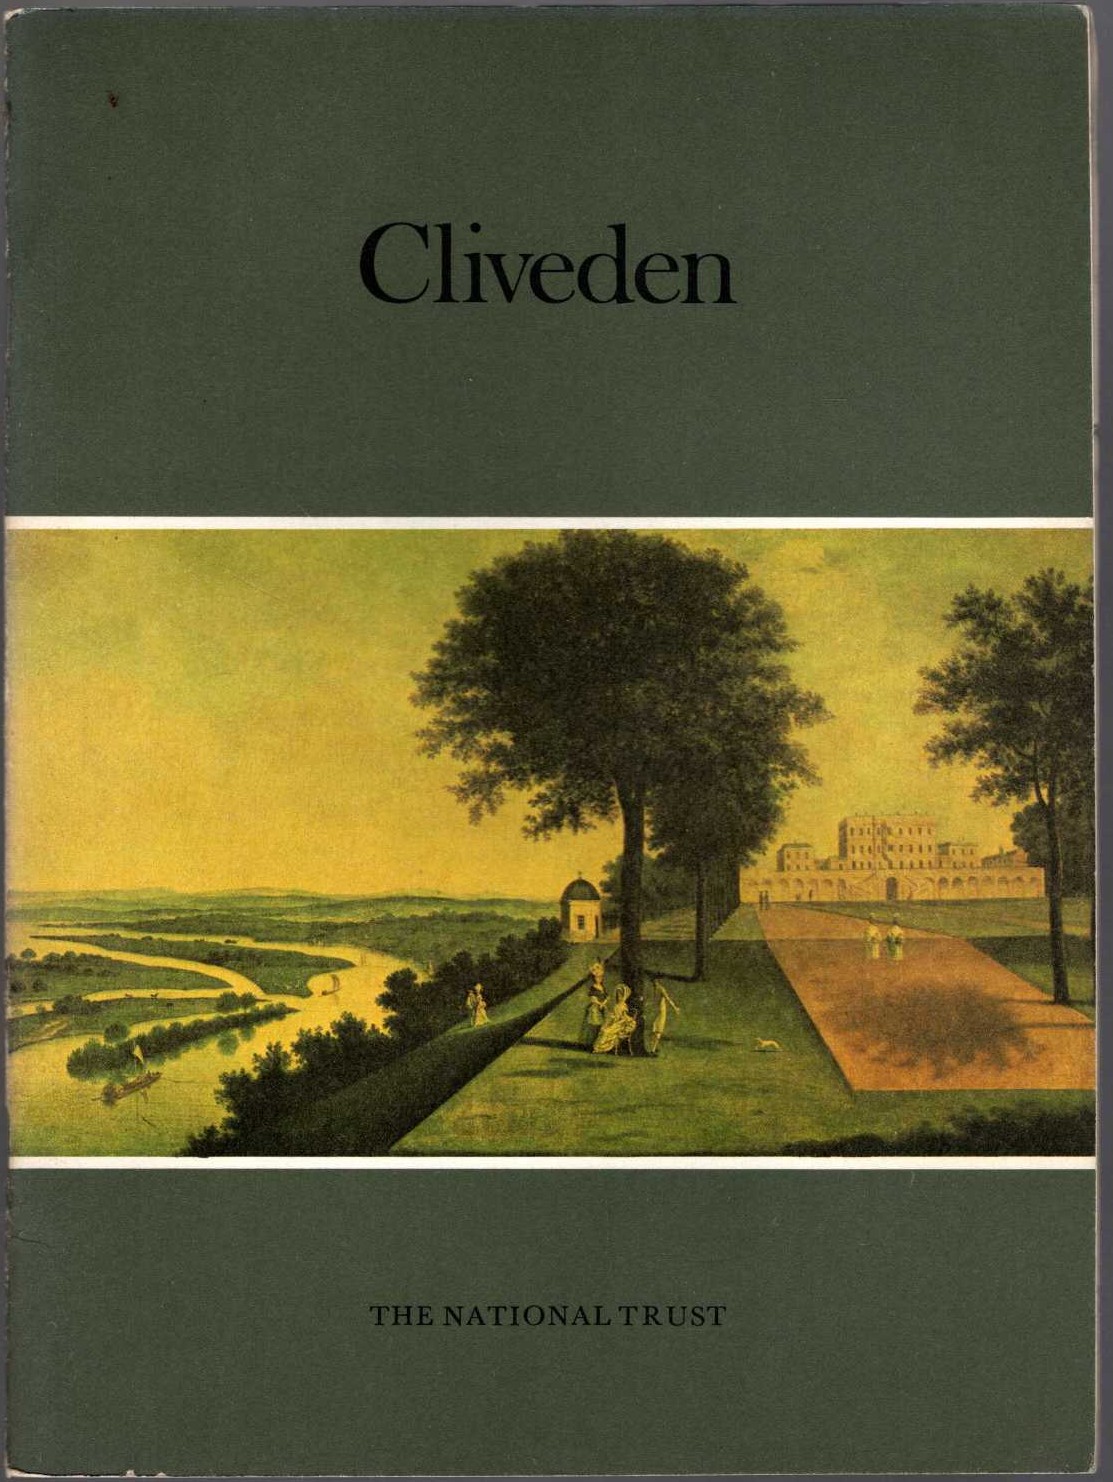 \ CLIVEDEN by The National Trust front book cover image